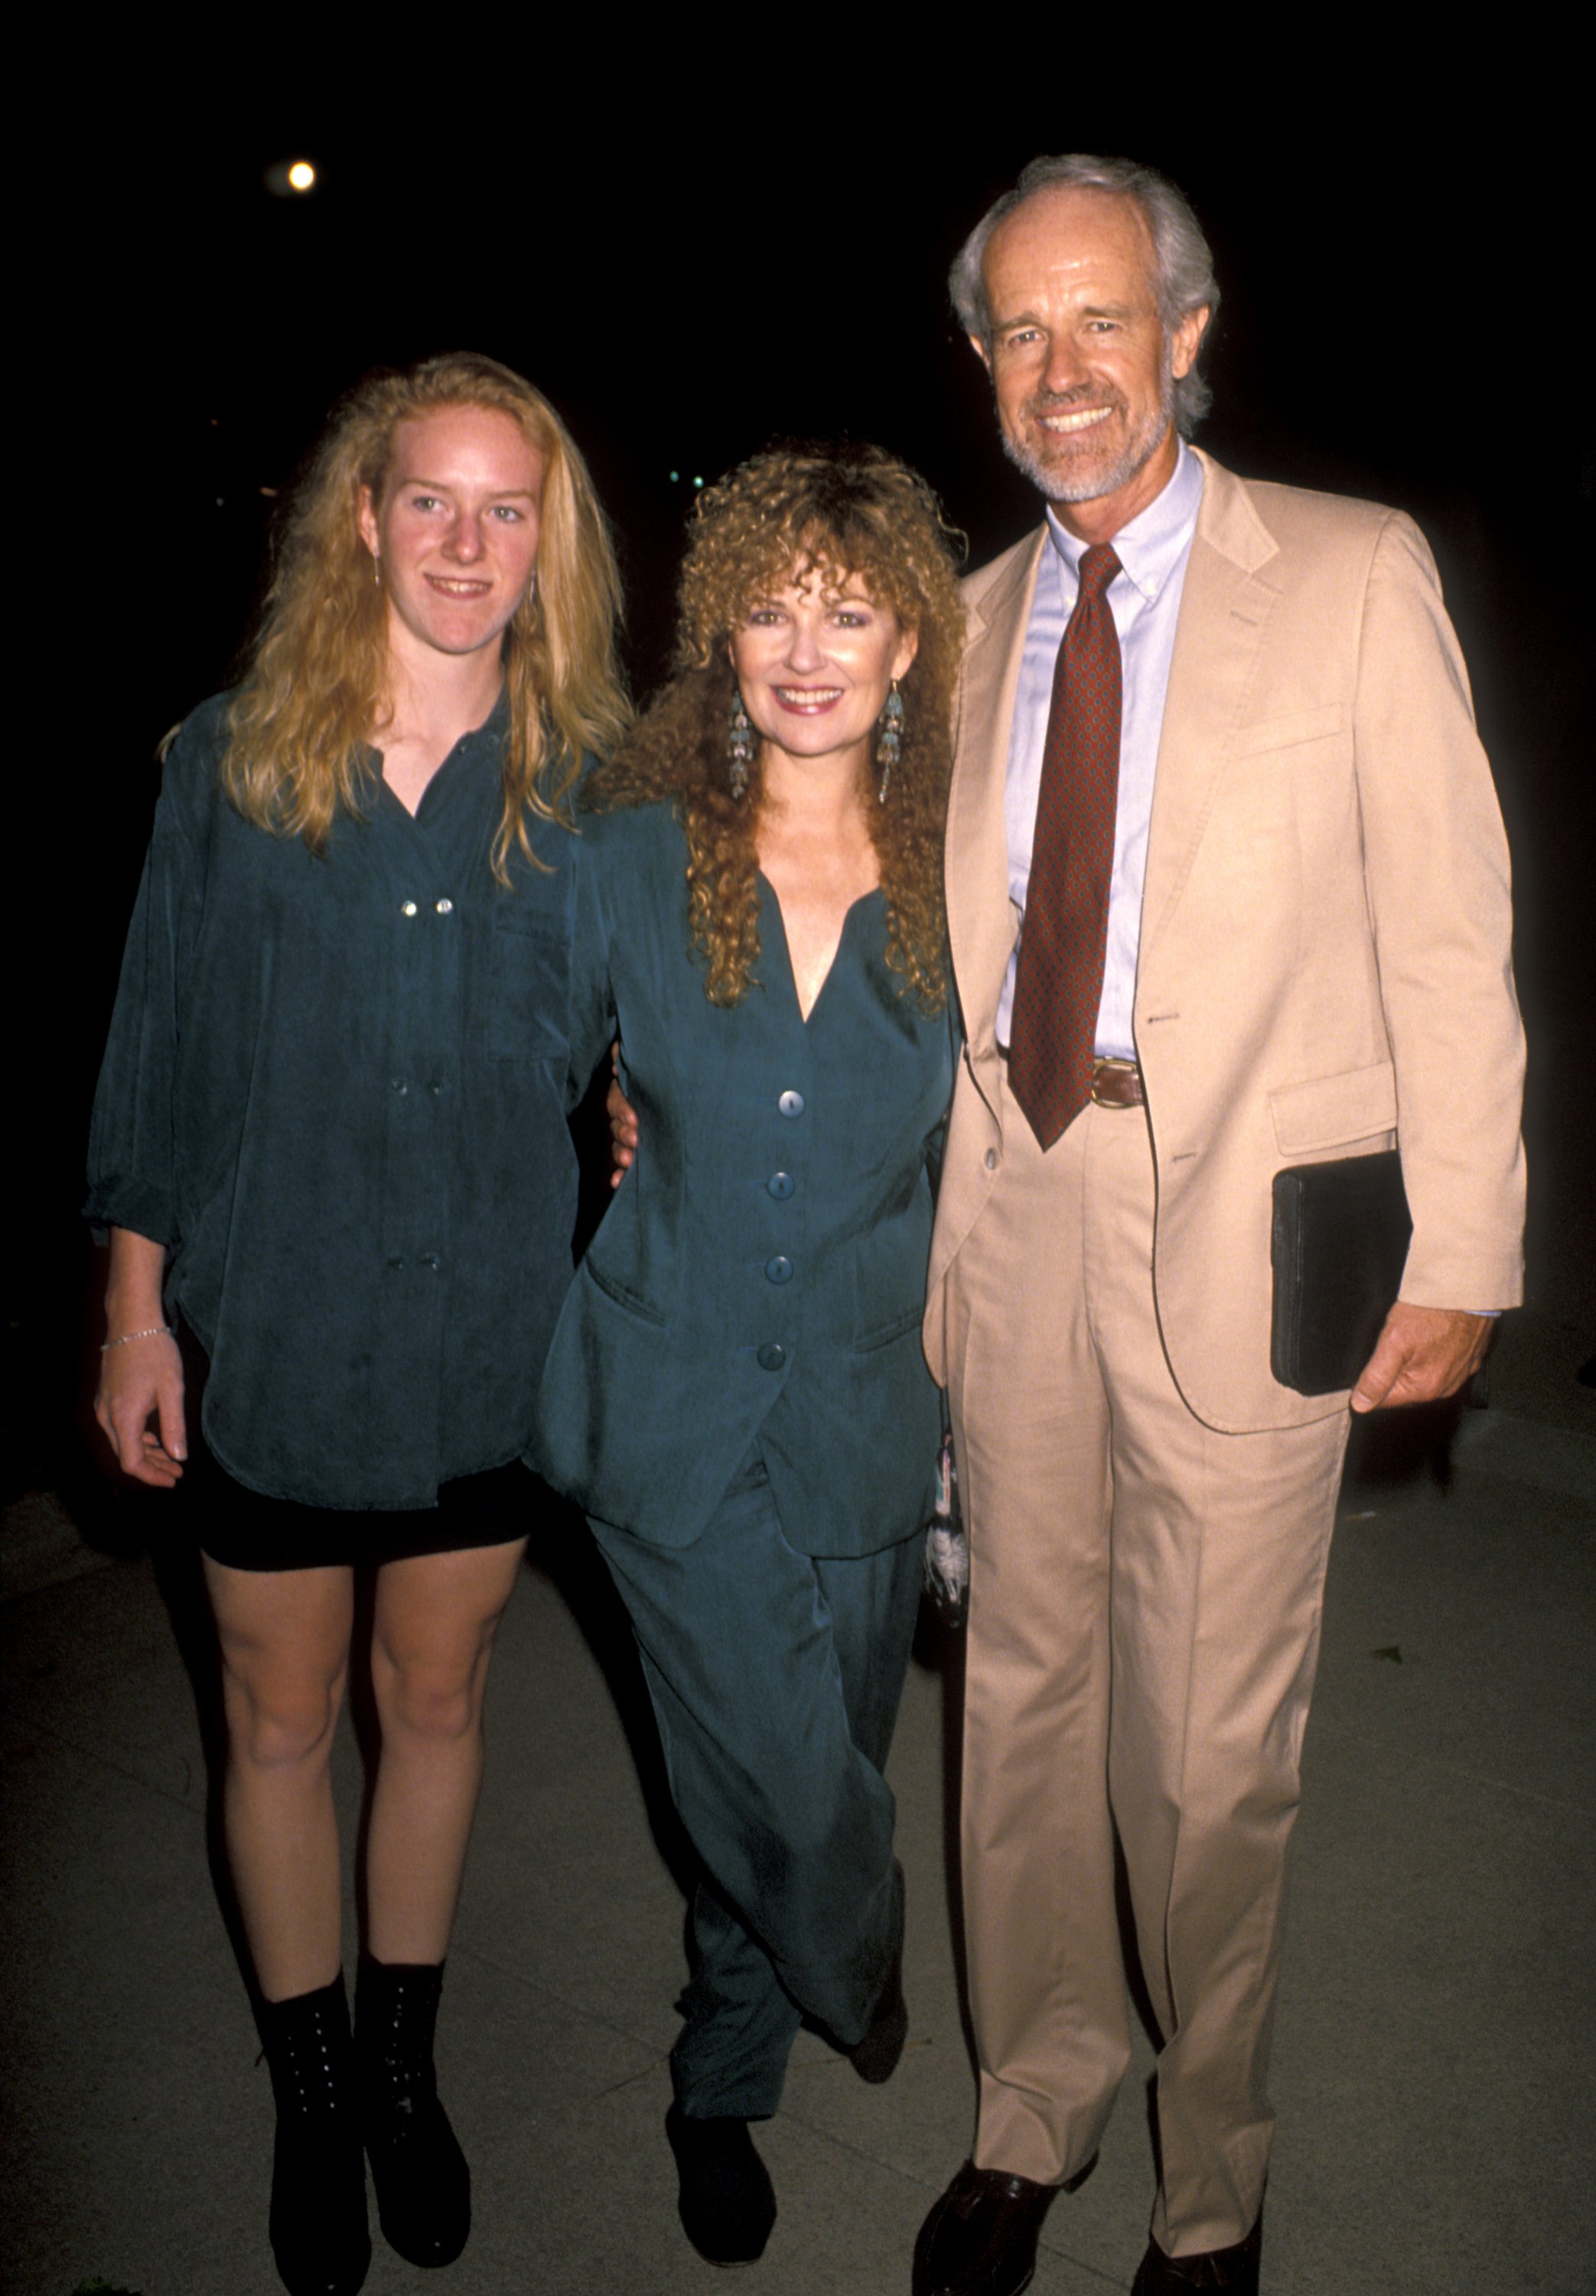 Shelly Fabares, Mike Farrell and Erin Farrell attend the 'ABC Fall Premiere Party' on September 12, 1990 at UCLA ┃Source: Getty Images